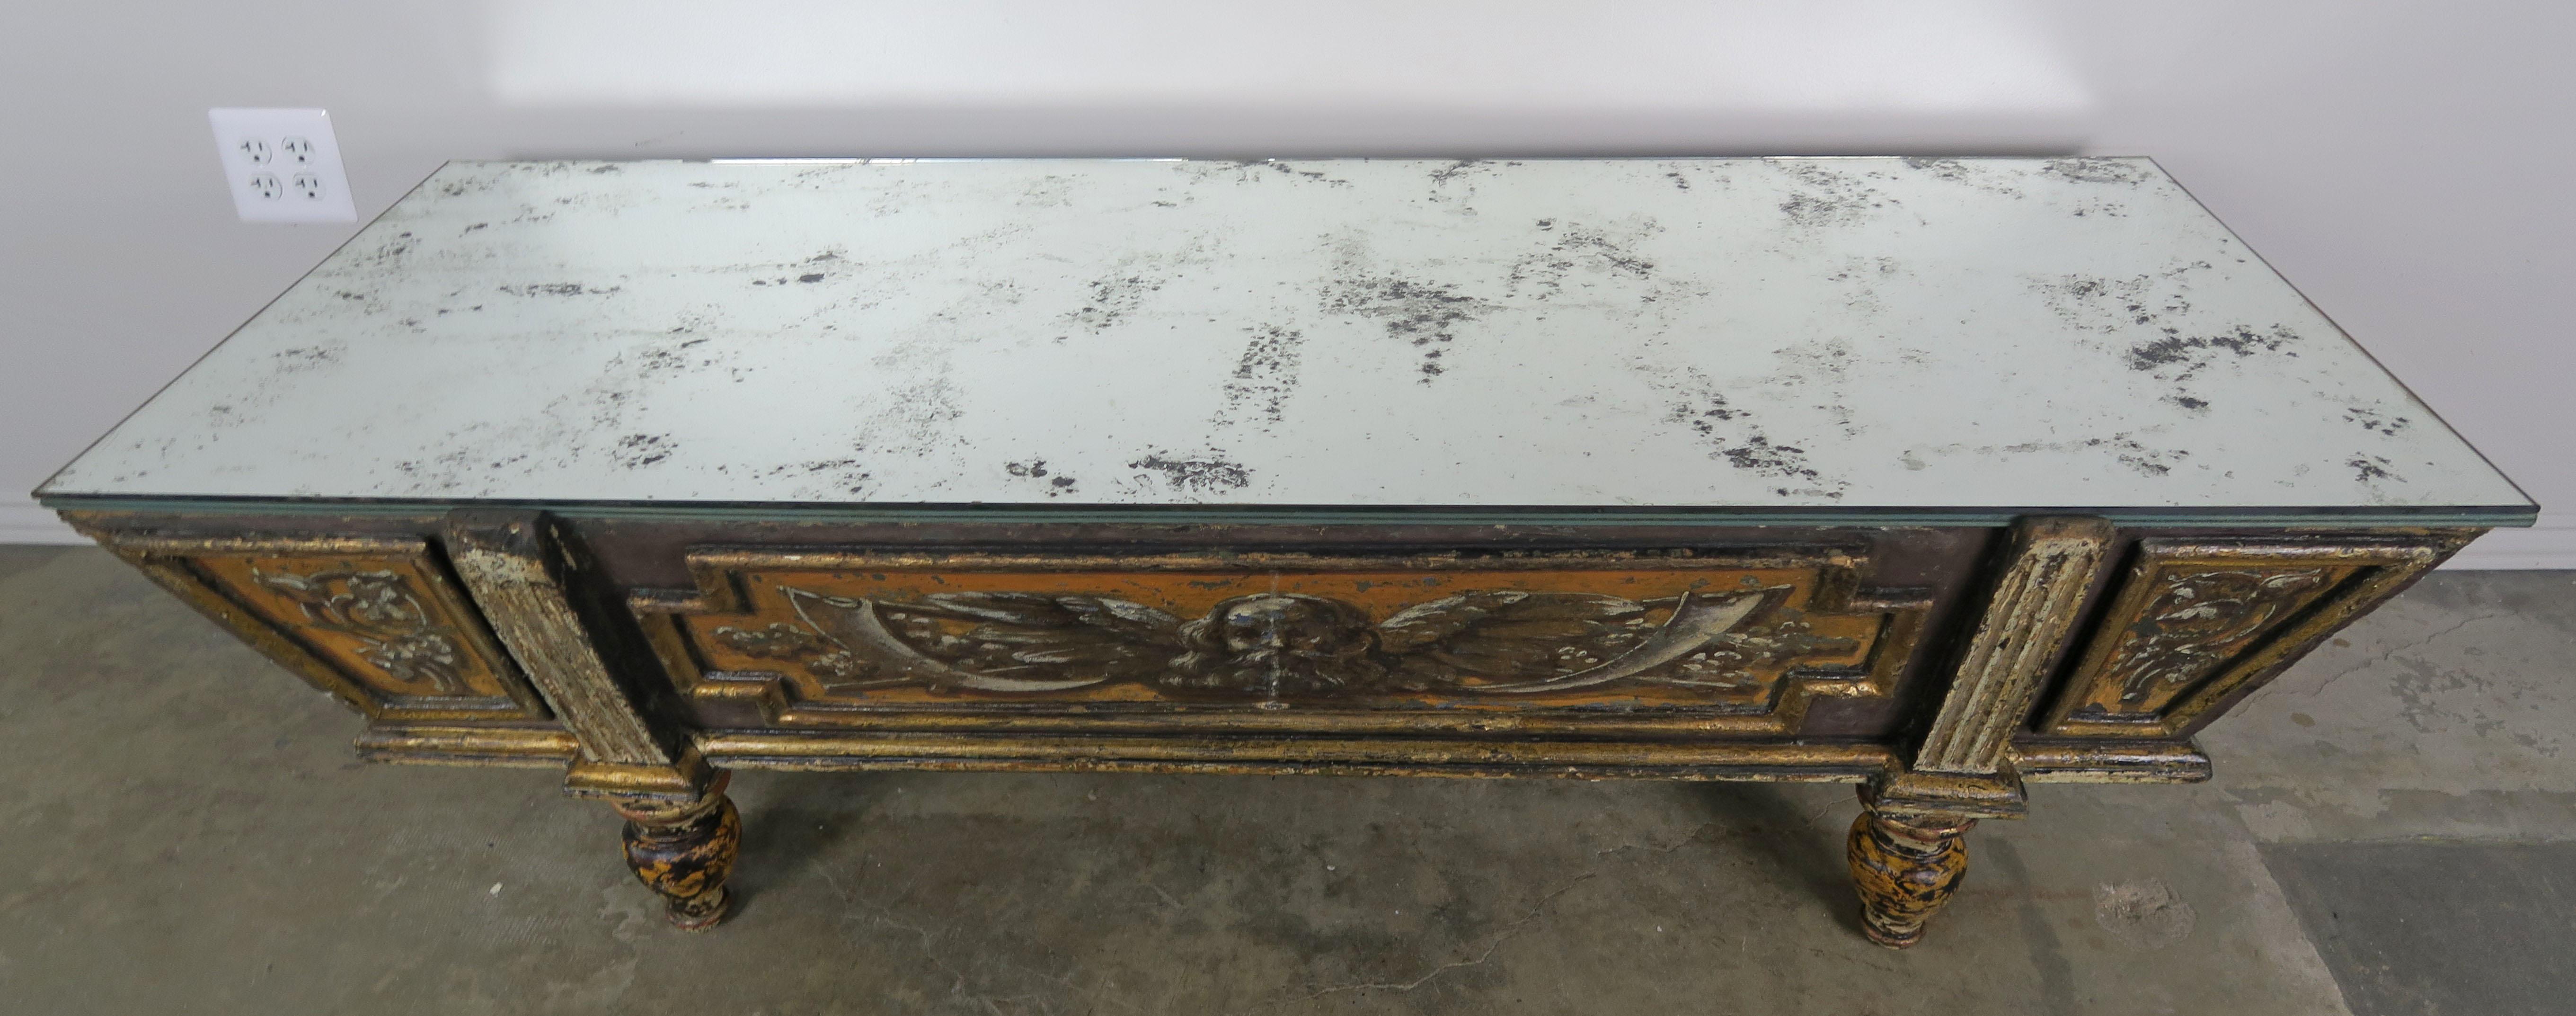 Baroque 19th Century Italian Painted Coffee Table with Mirrored Top